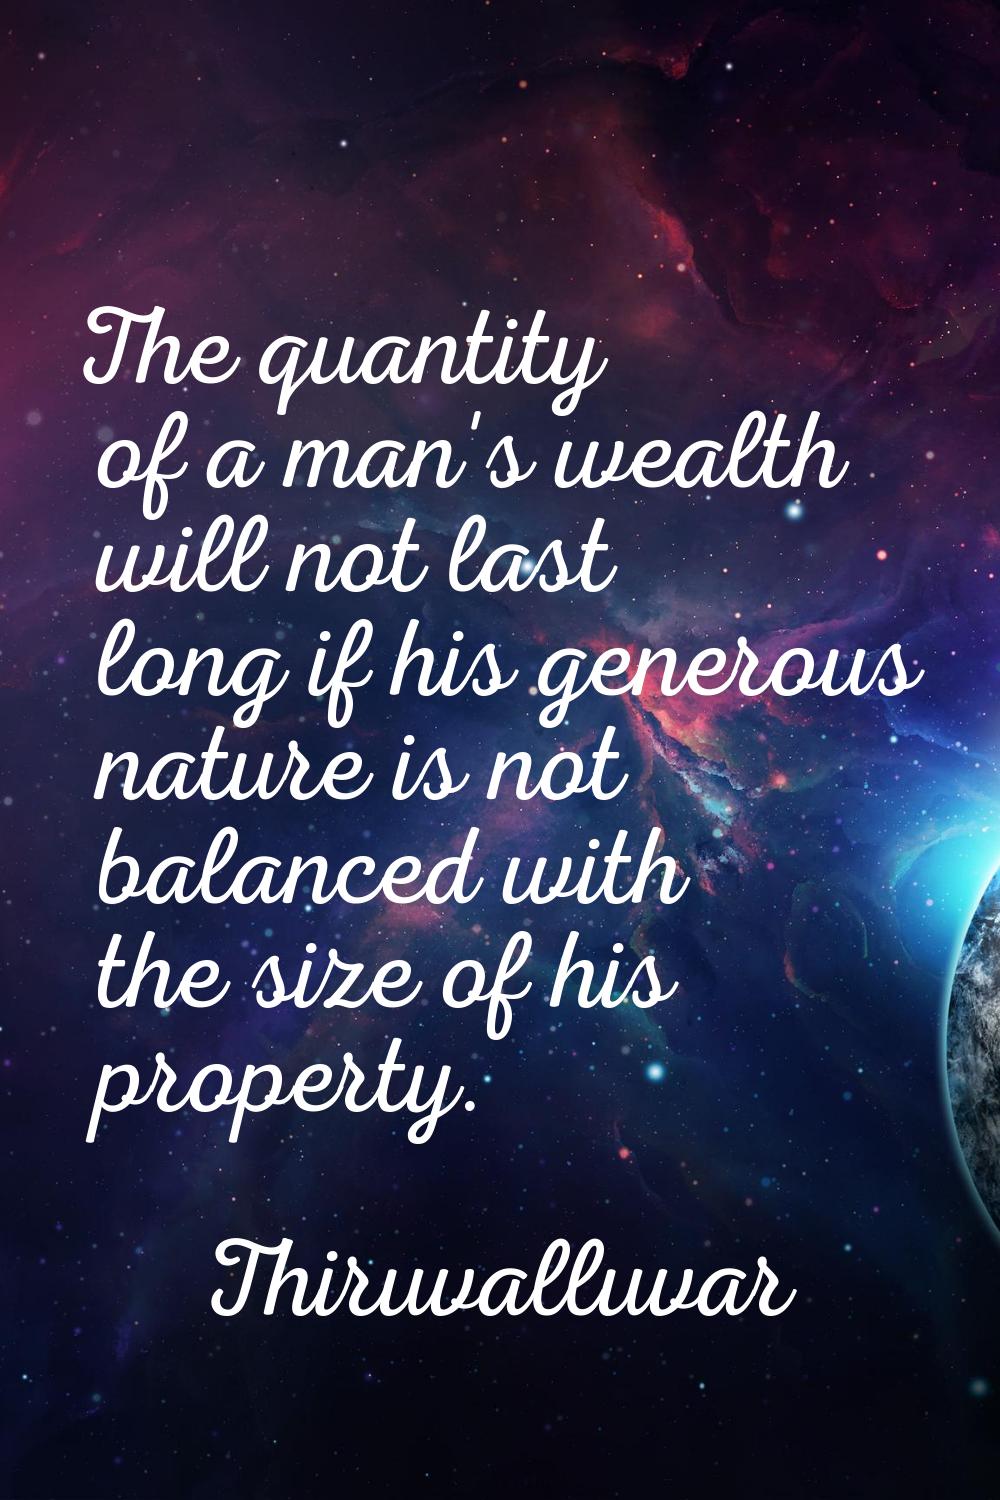 The quantity of a man's wealth will not last long if his generous nature is not balanced with the s